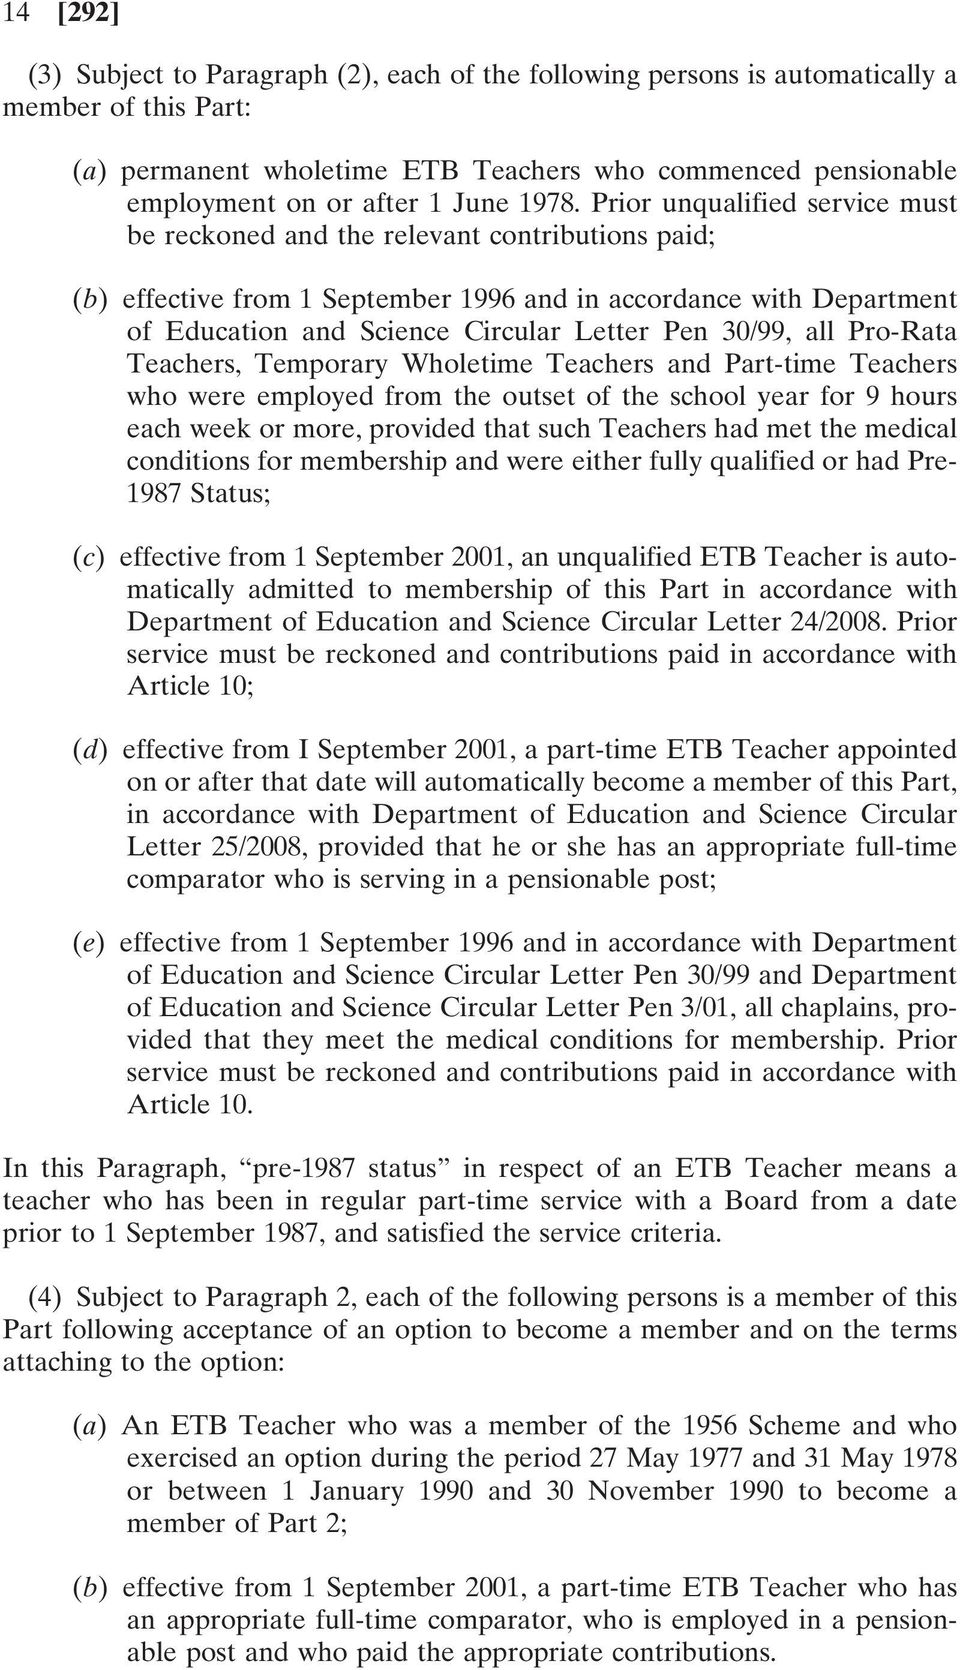 Prior unqualified service must be reckoned and the relevant contributions paid; (b) effective from 1 September 1996 and in accordance with Department of Education and Science Circular Letter Pen